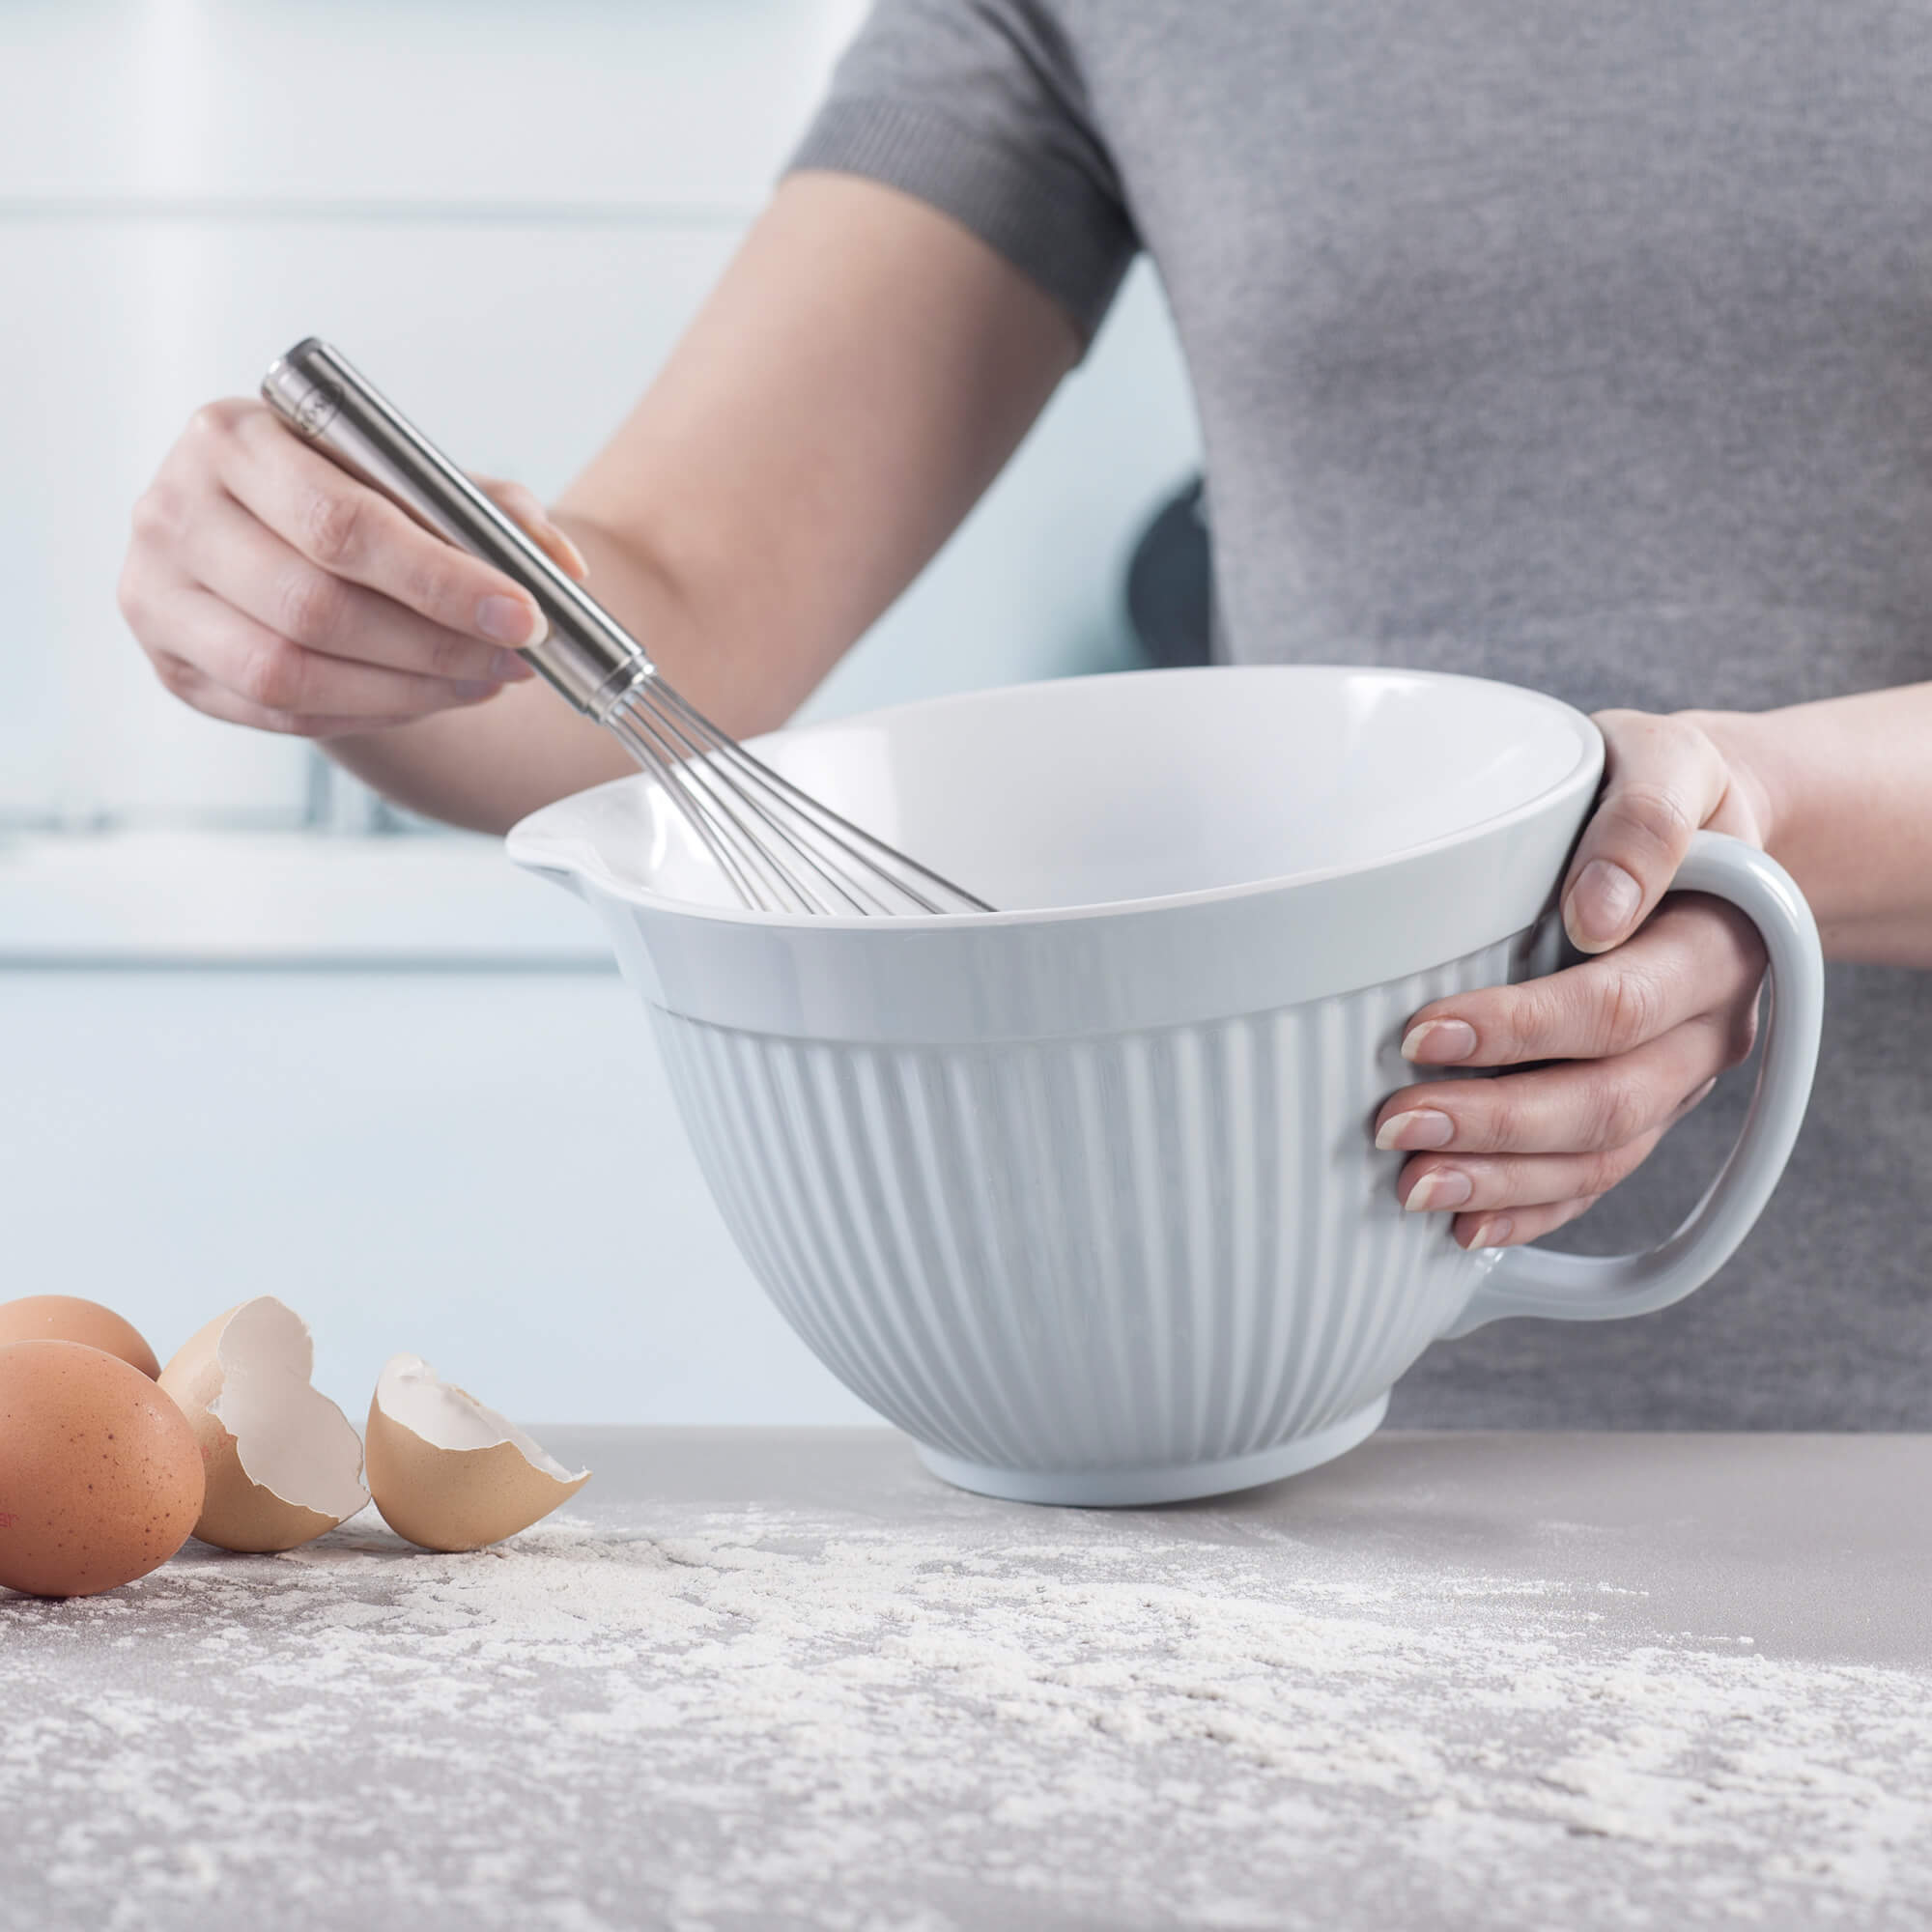 Baking using the Zeal Mixing Bowl Jug in Duck Egg Blue